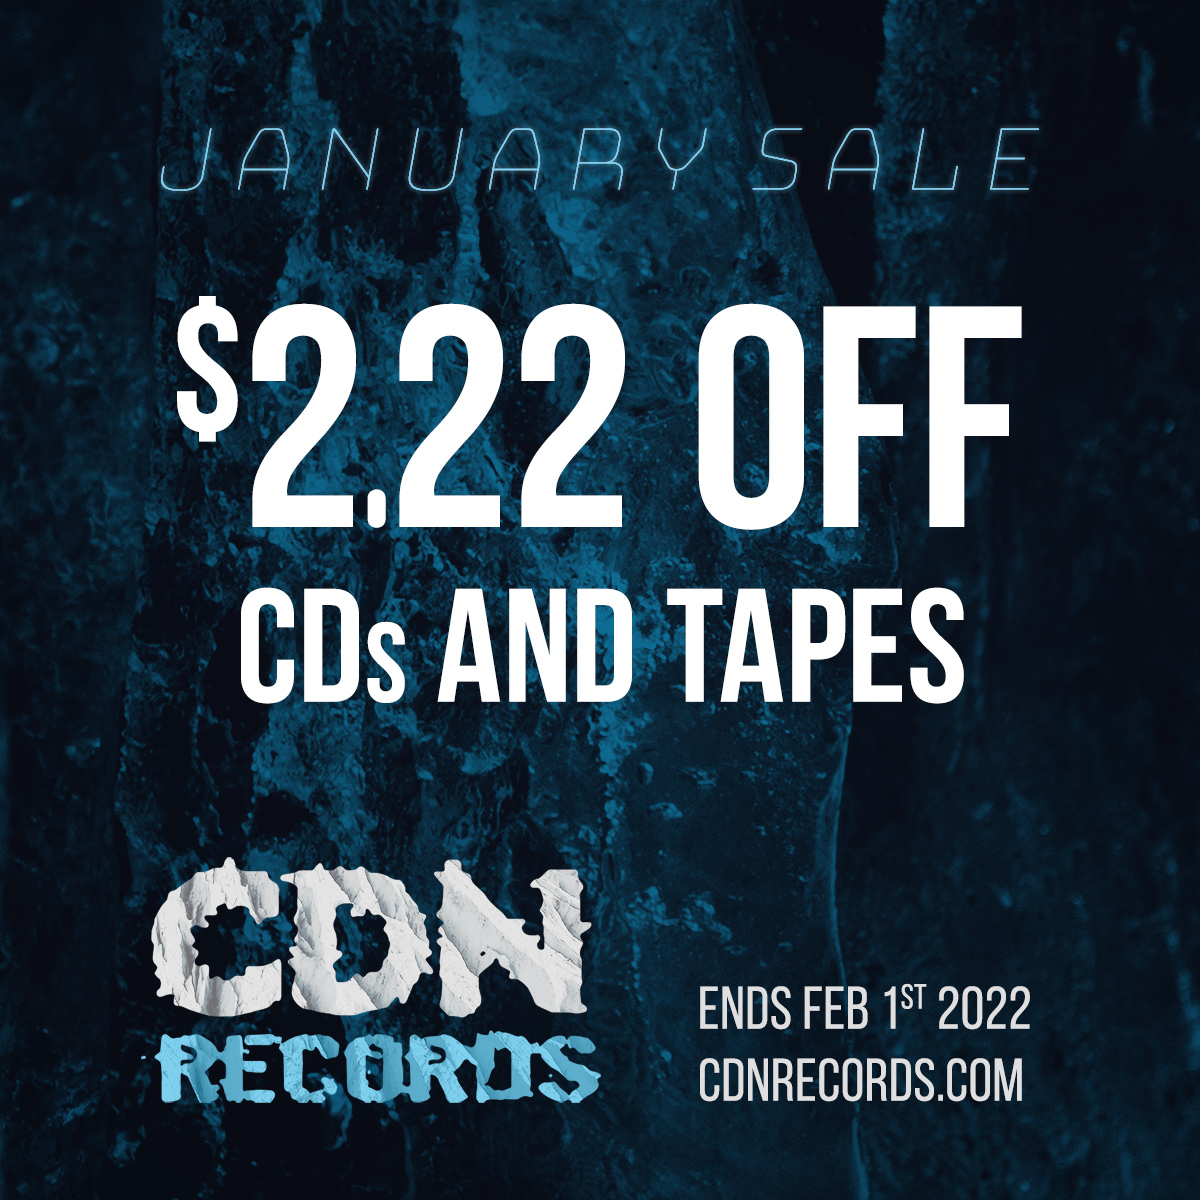 Graphic for January sale